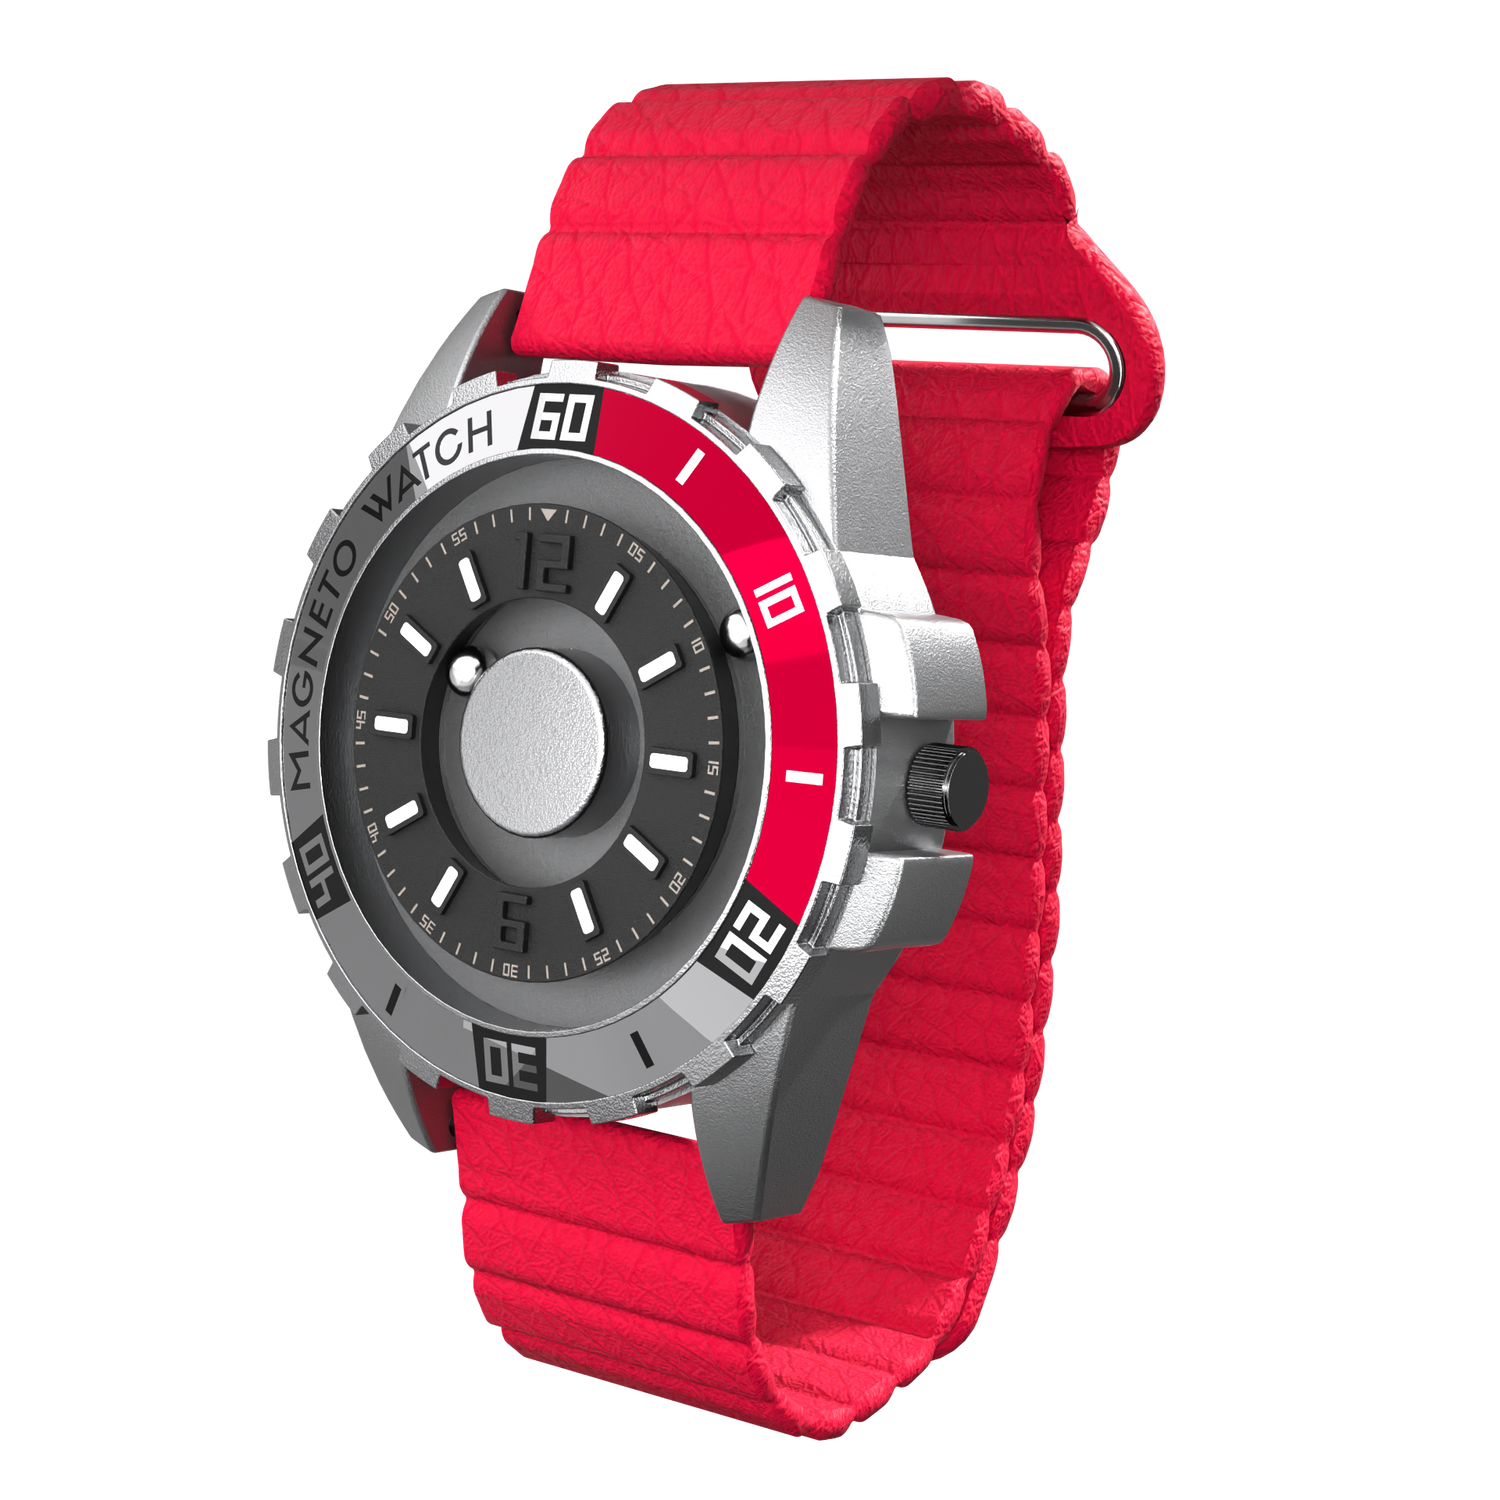 Uranus Red synthetic leather magnetic red